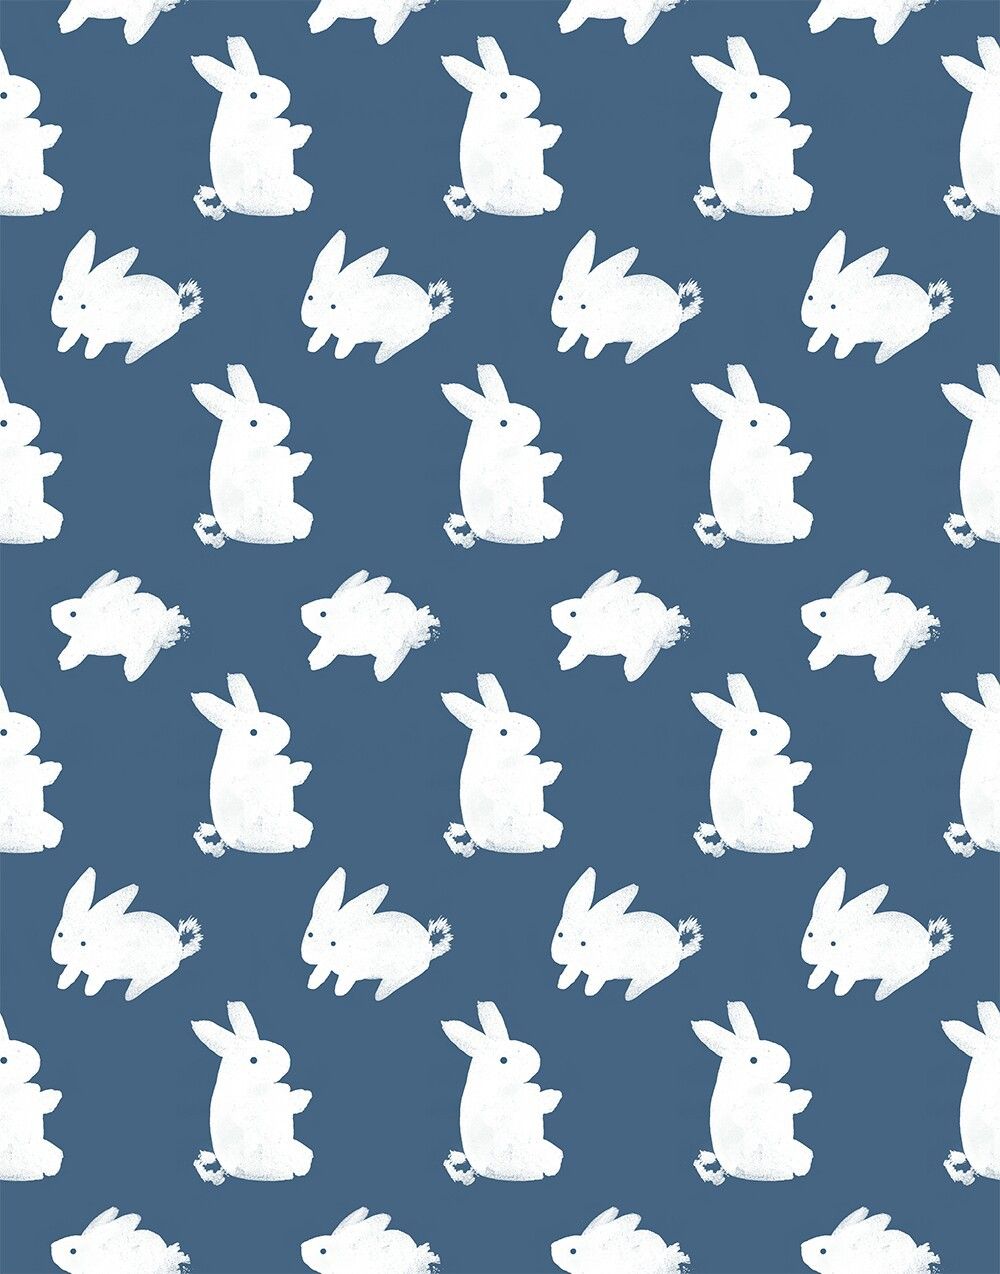 Blue bunnies discovered by Mithduil de Rivendel